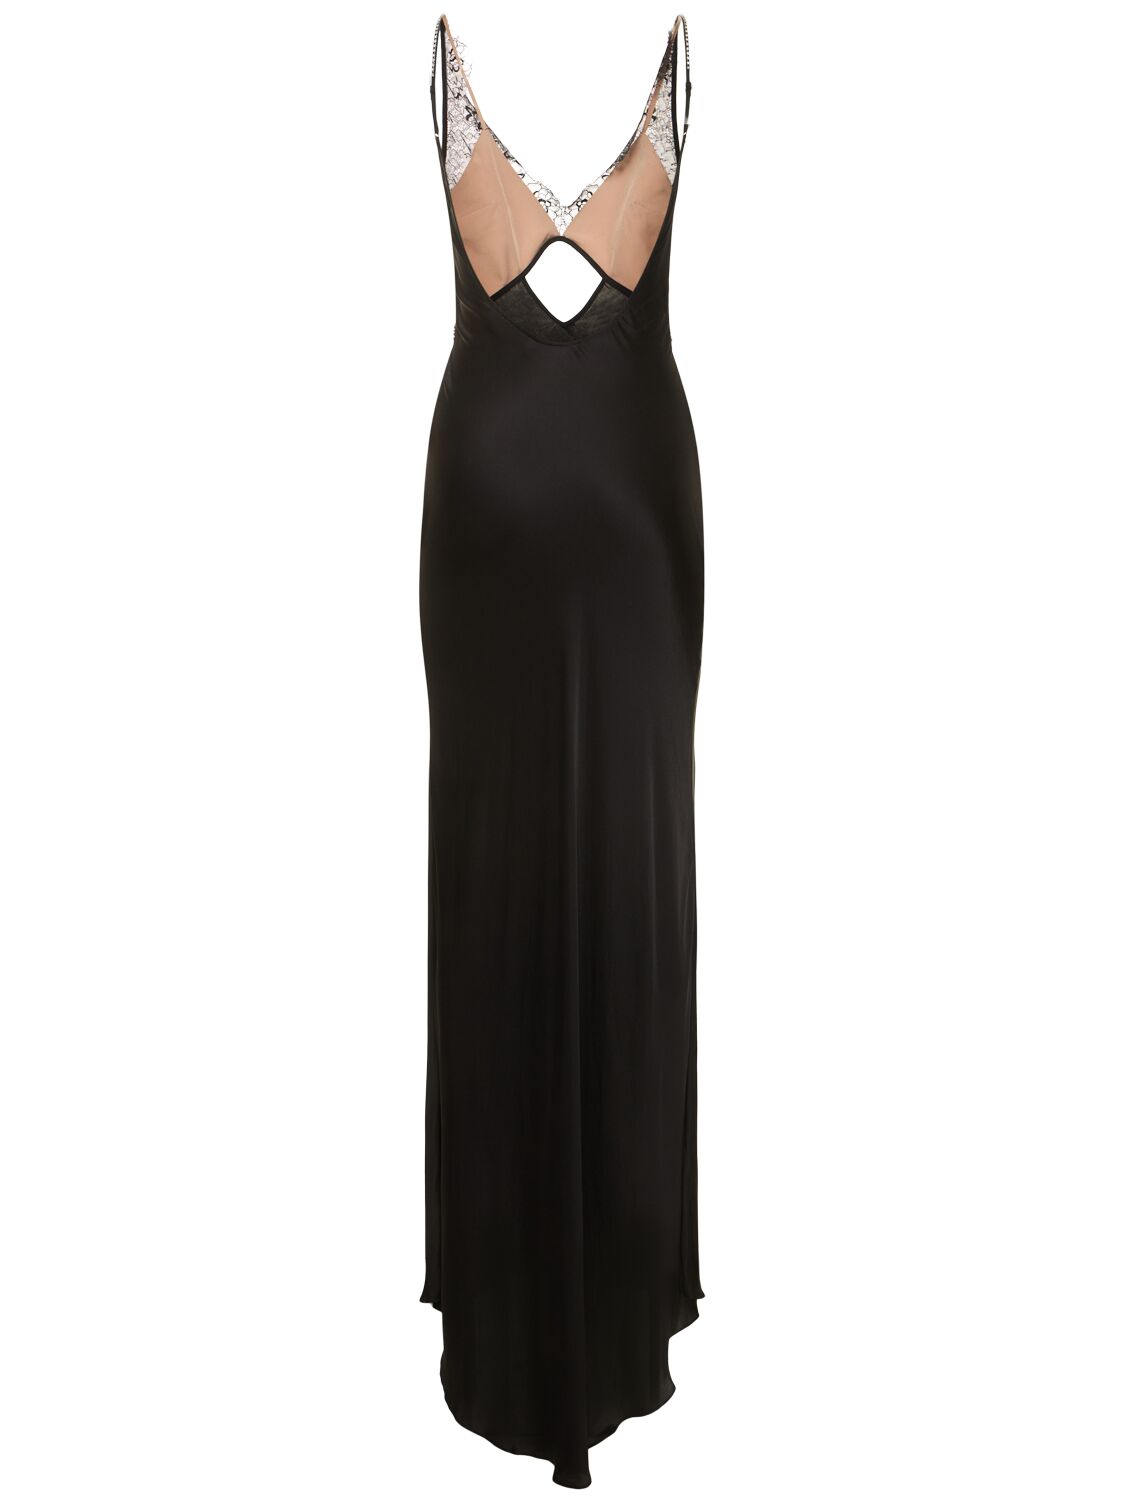 SELF-PORTRAIT Cutout crystal-embellished lace and satin maxi dress